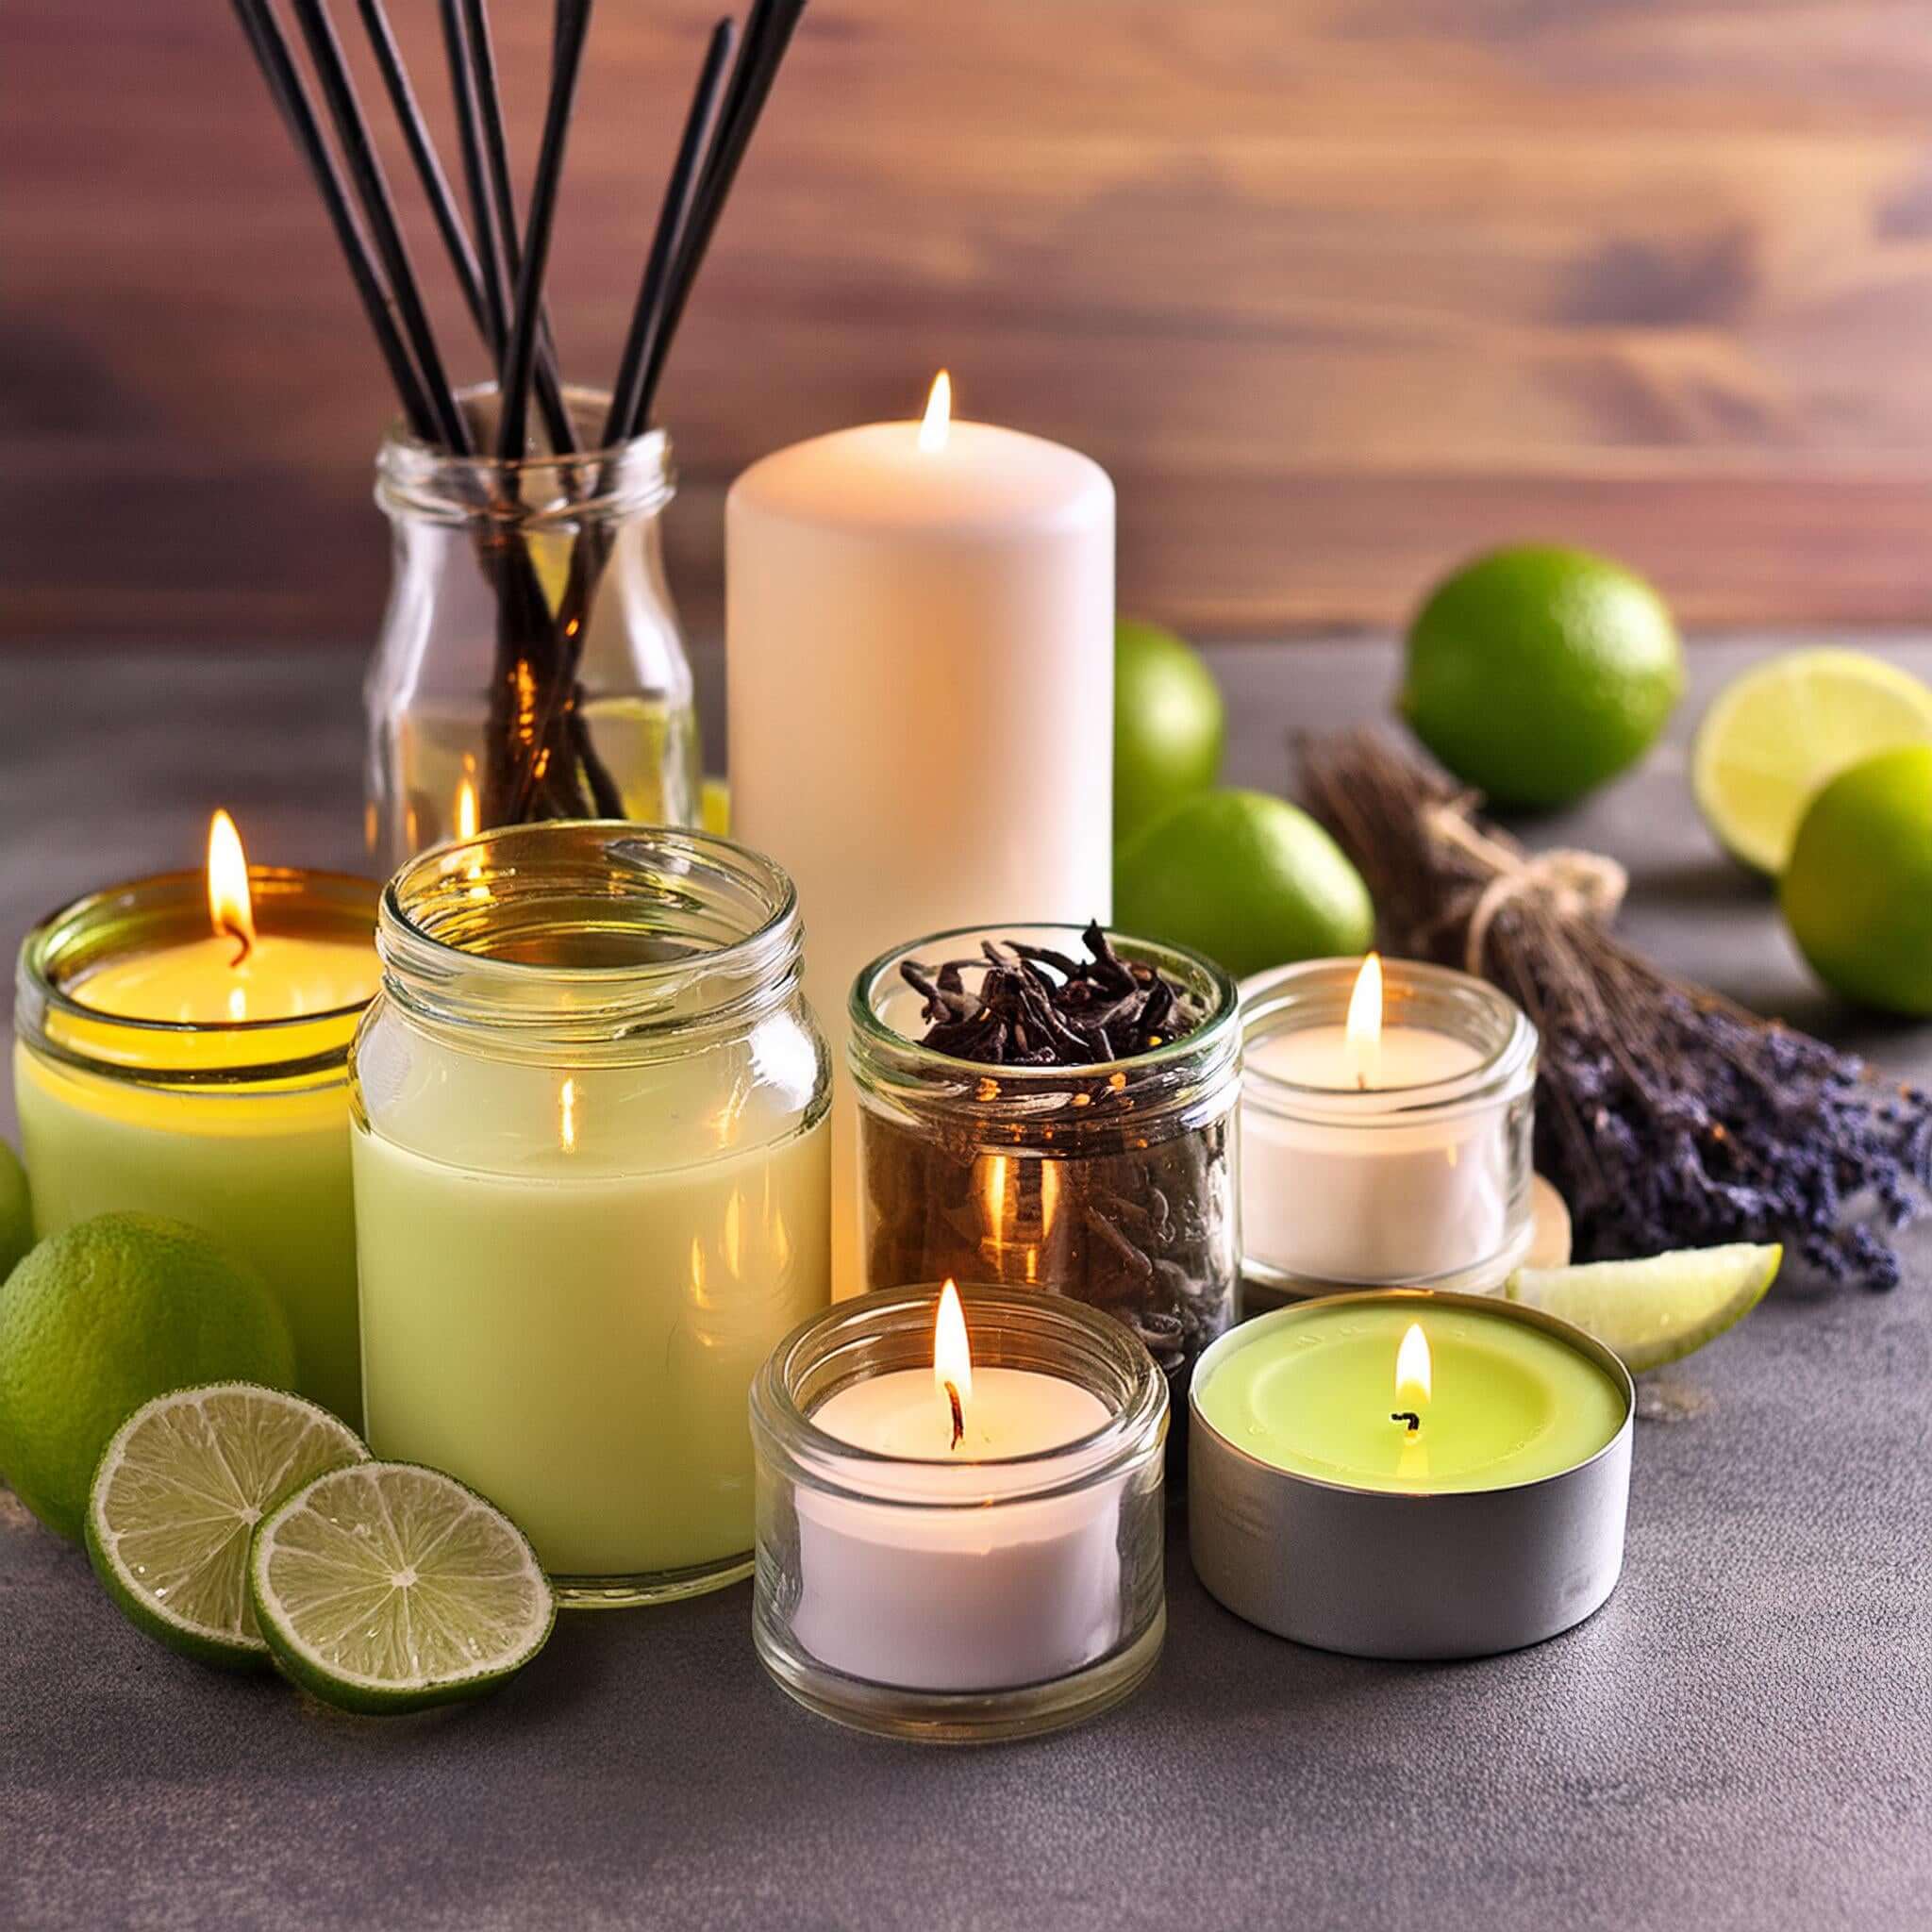 Candle Magic: The Surprising Psychological Power of Scents to Transform Your Space